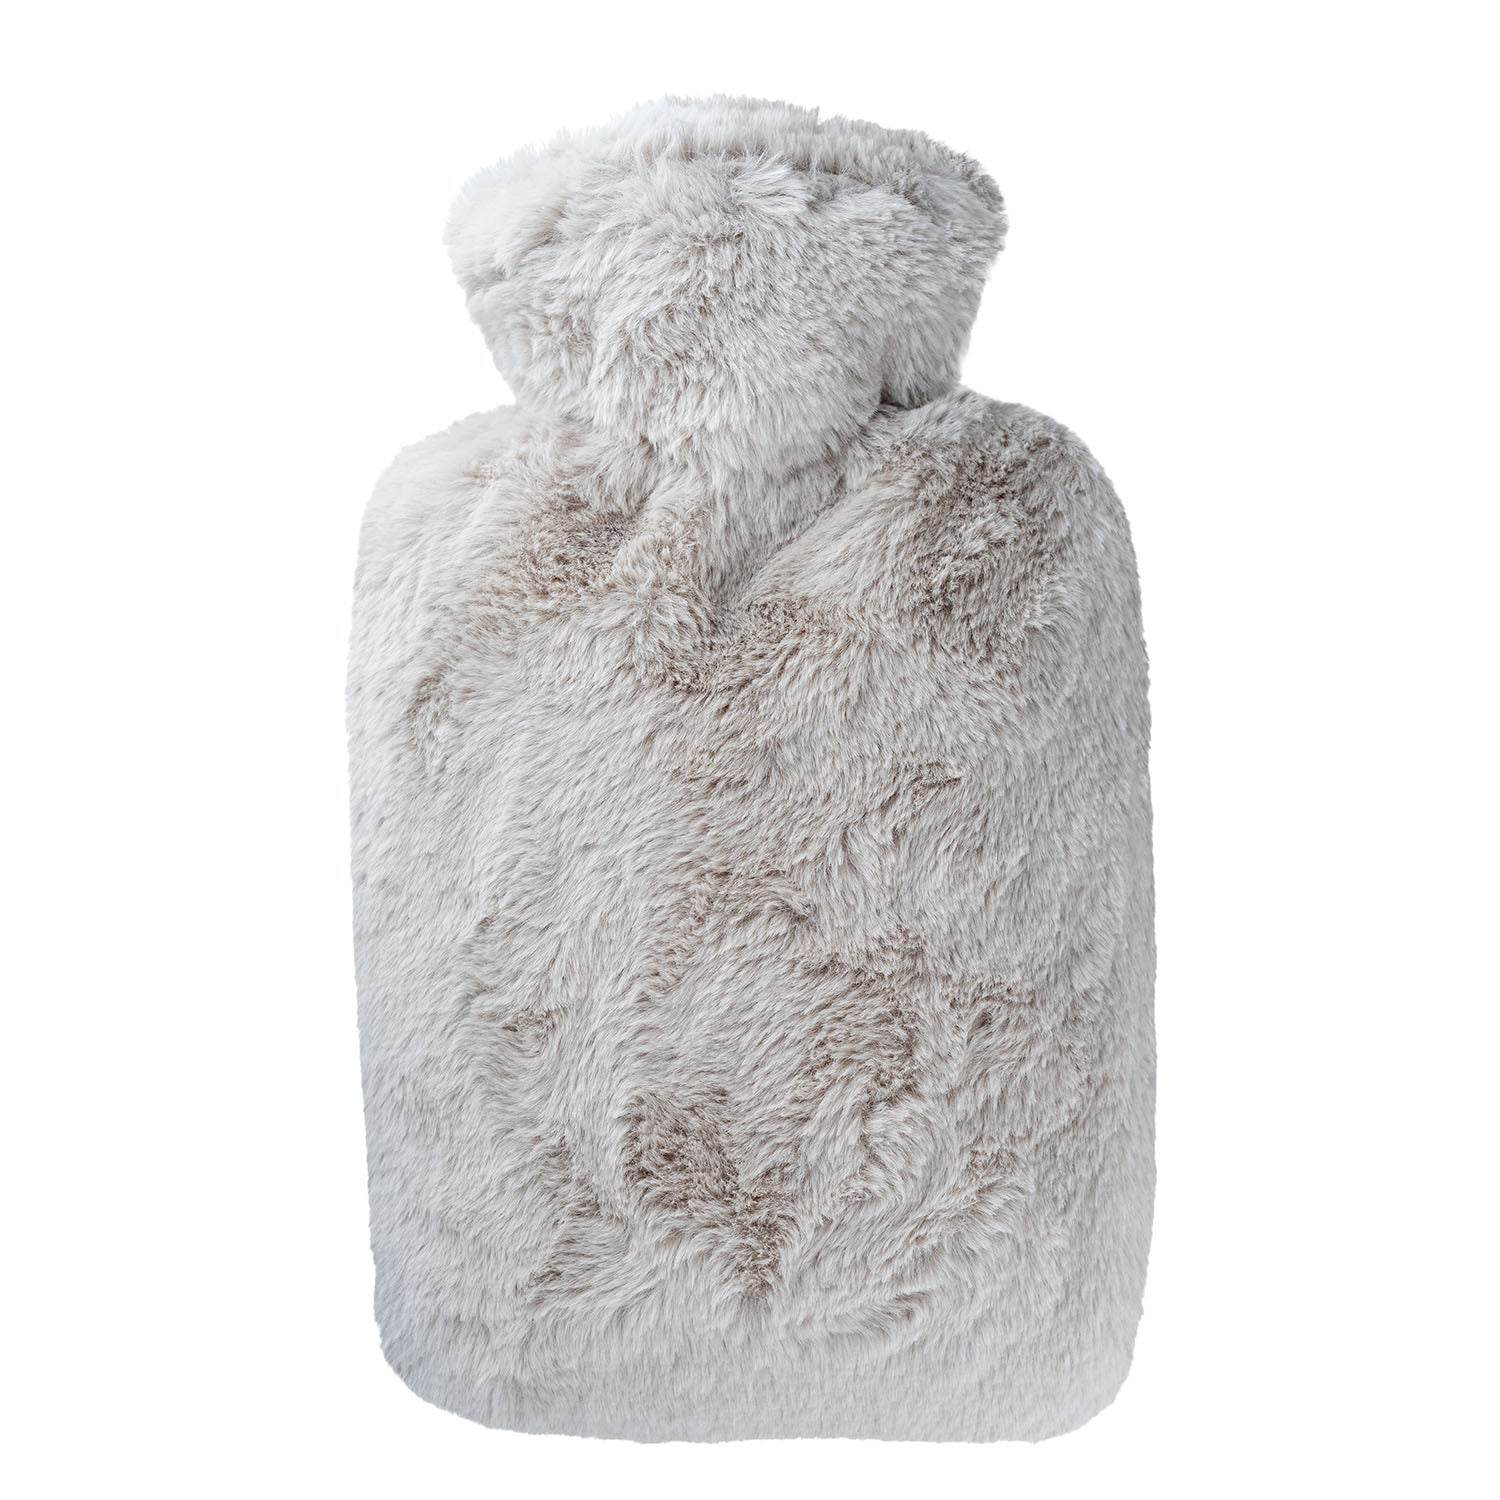 1.8 Litre Hot Water Bottle with Taupe Long Hair Luxury Faux Fur Cover (rubberless)